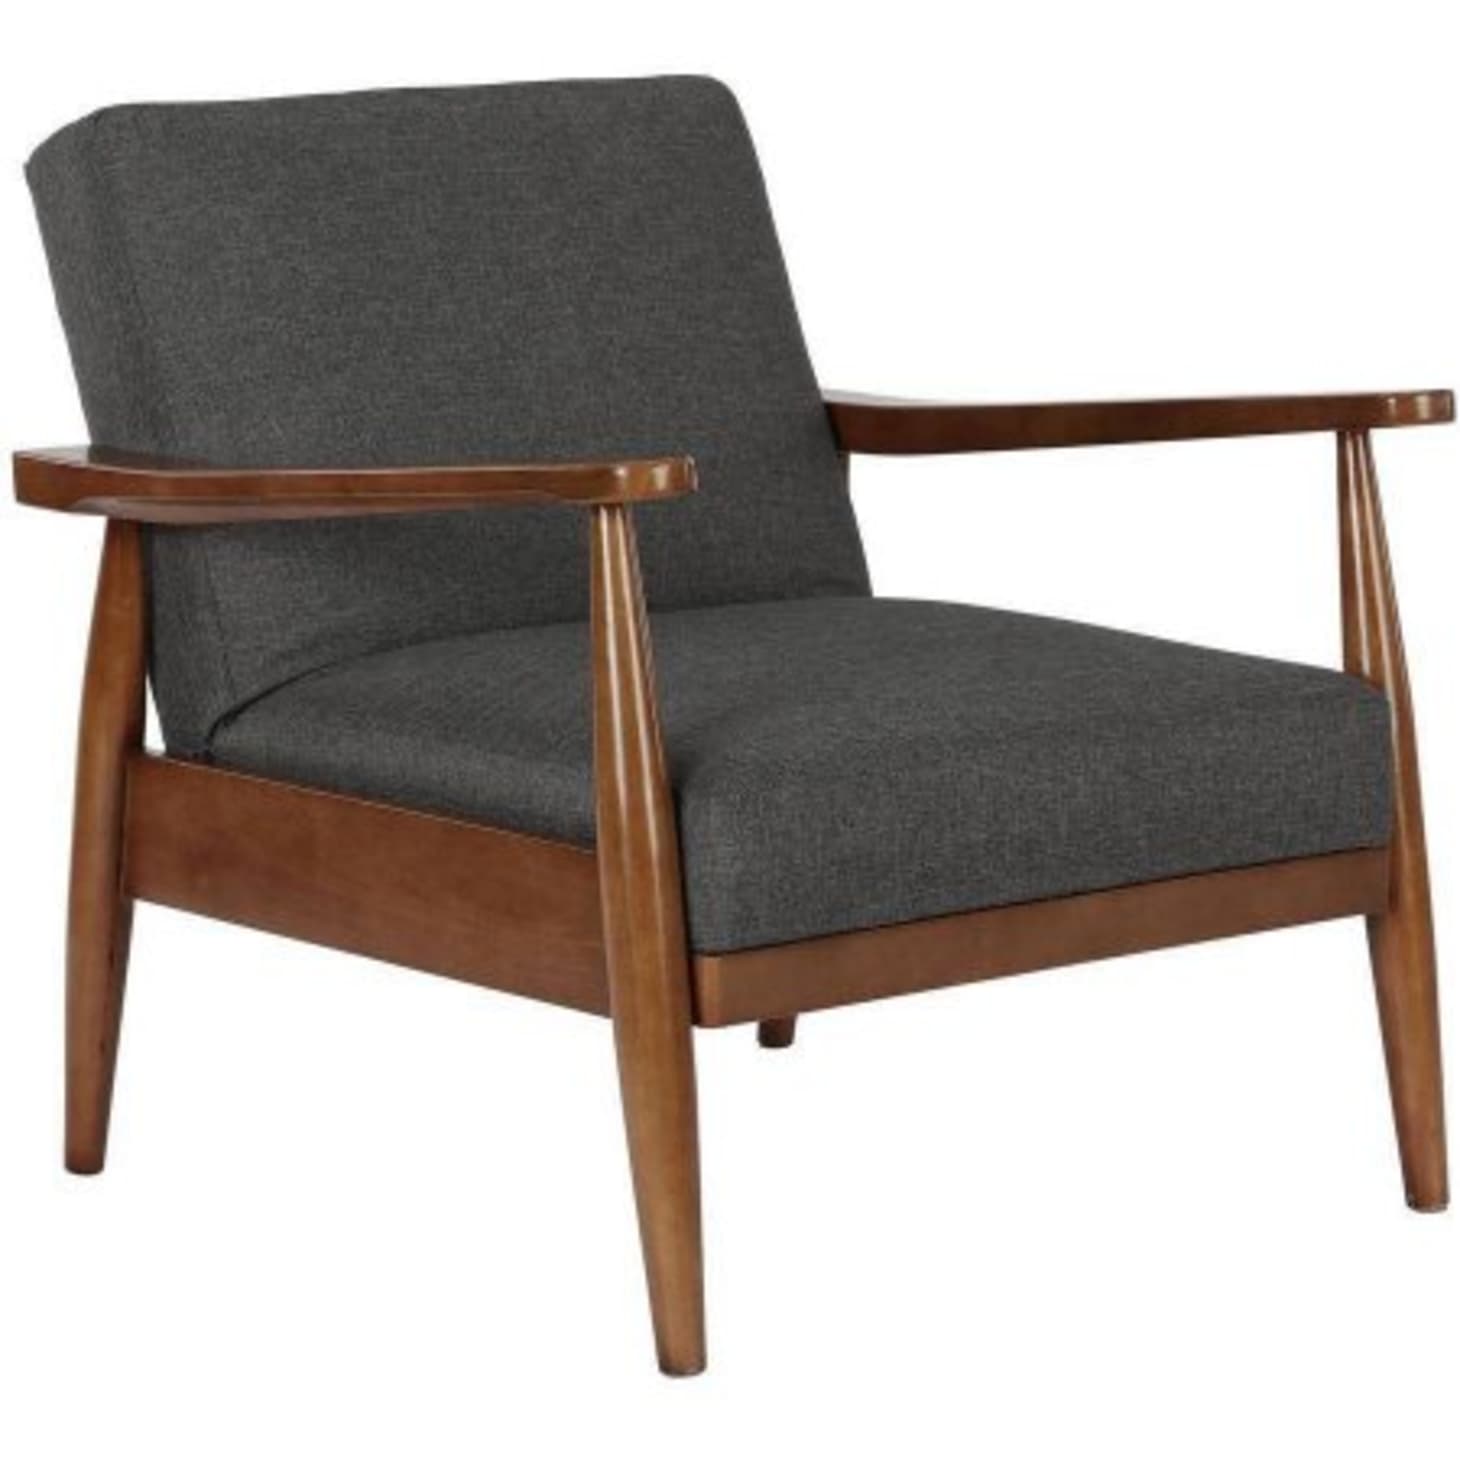 The Best Mid Century Modern Furniture At Walmart Apartment Therapy